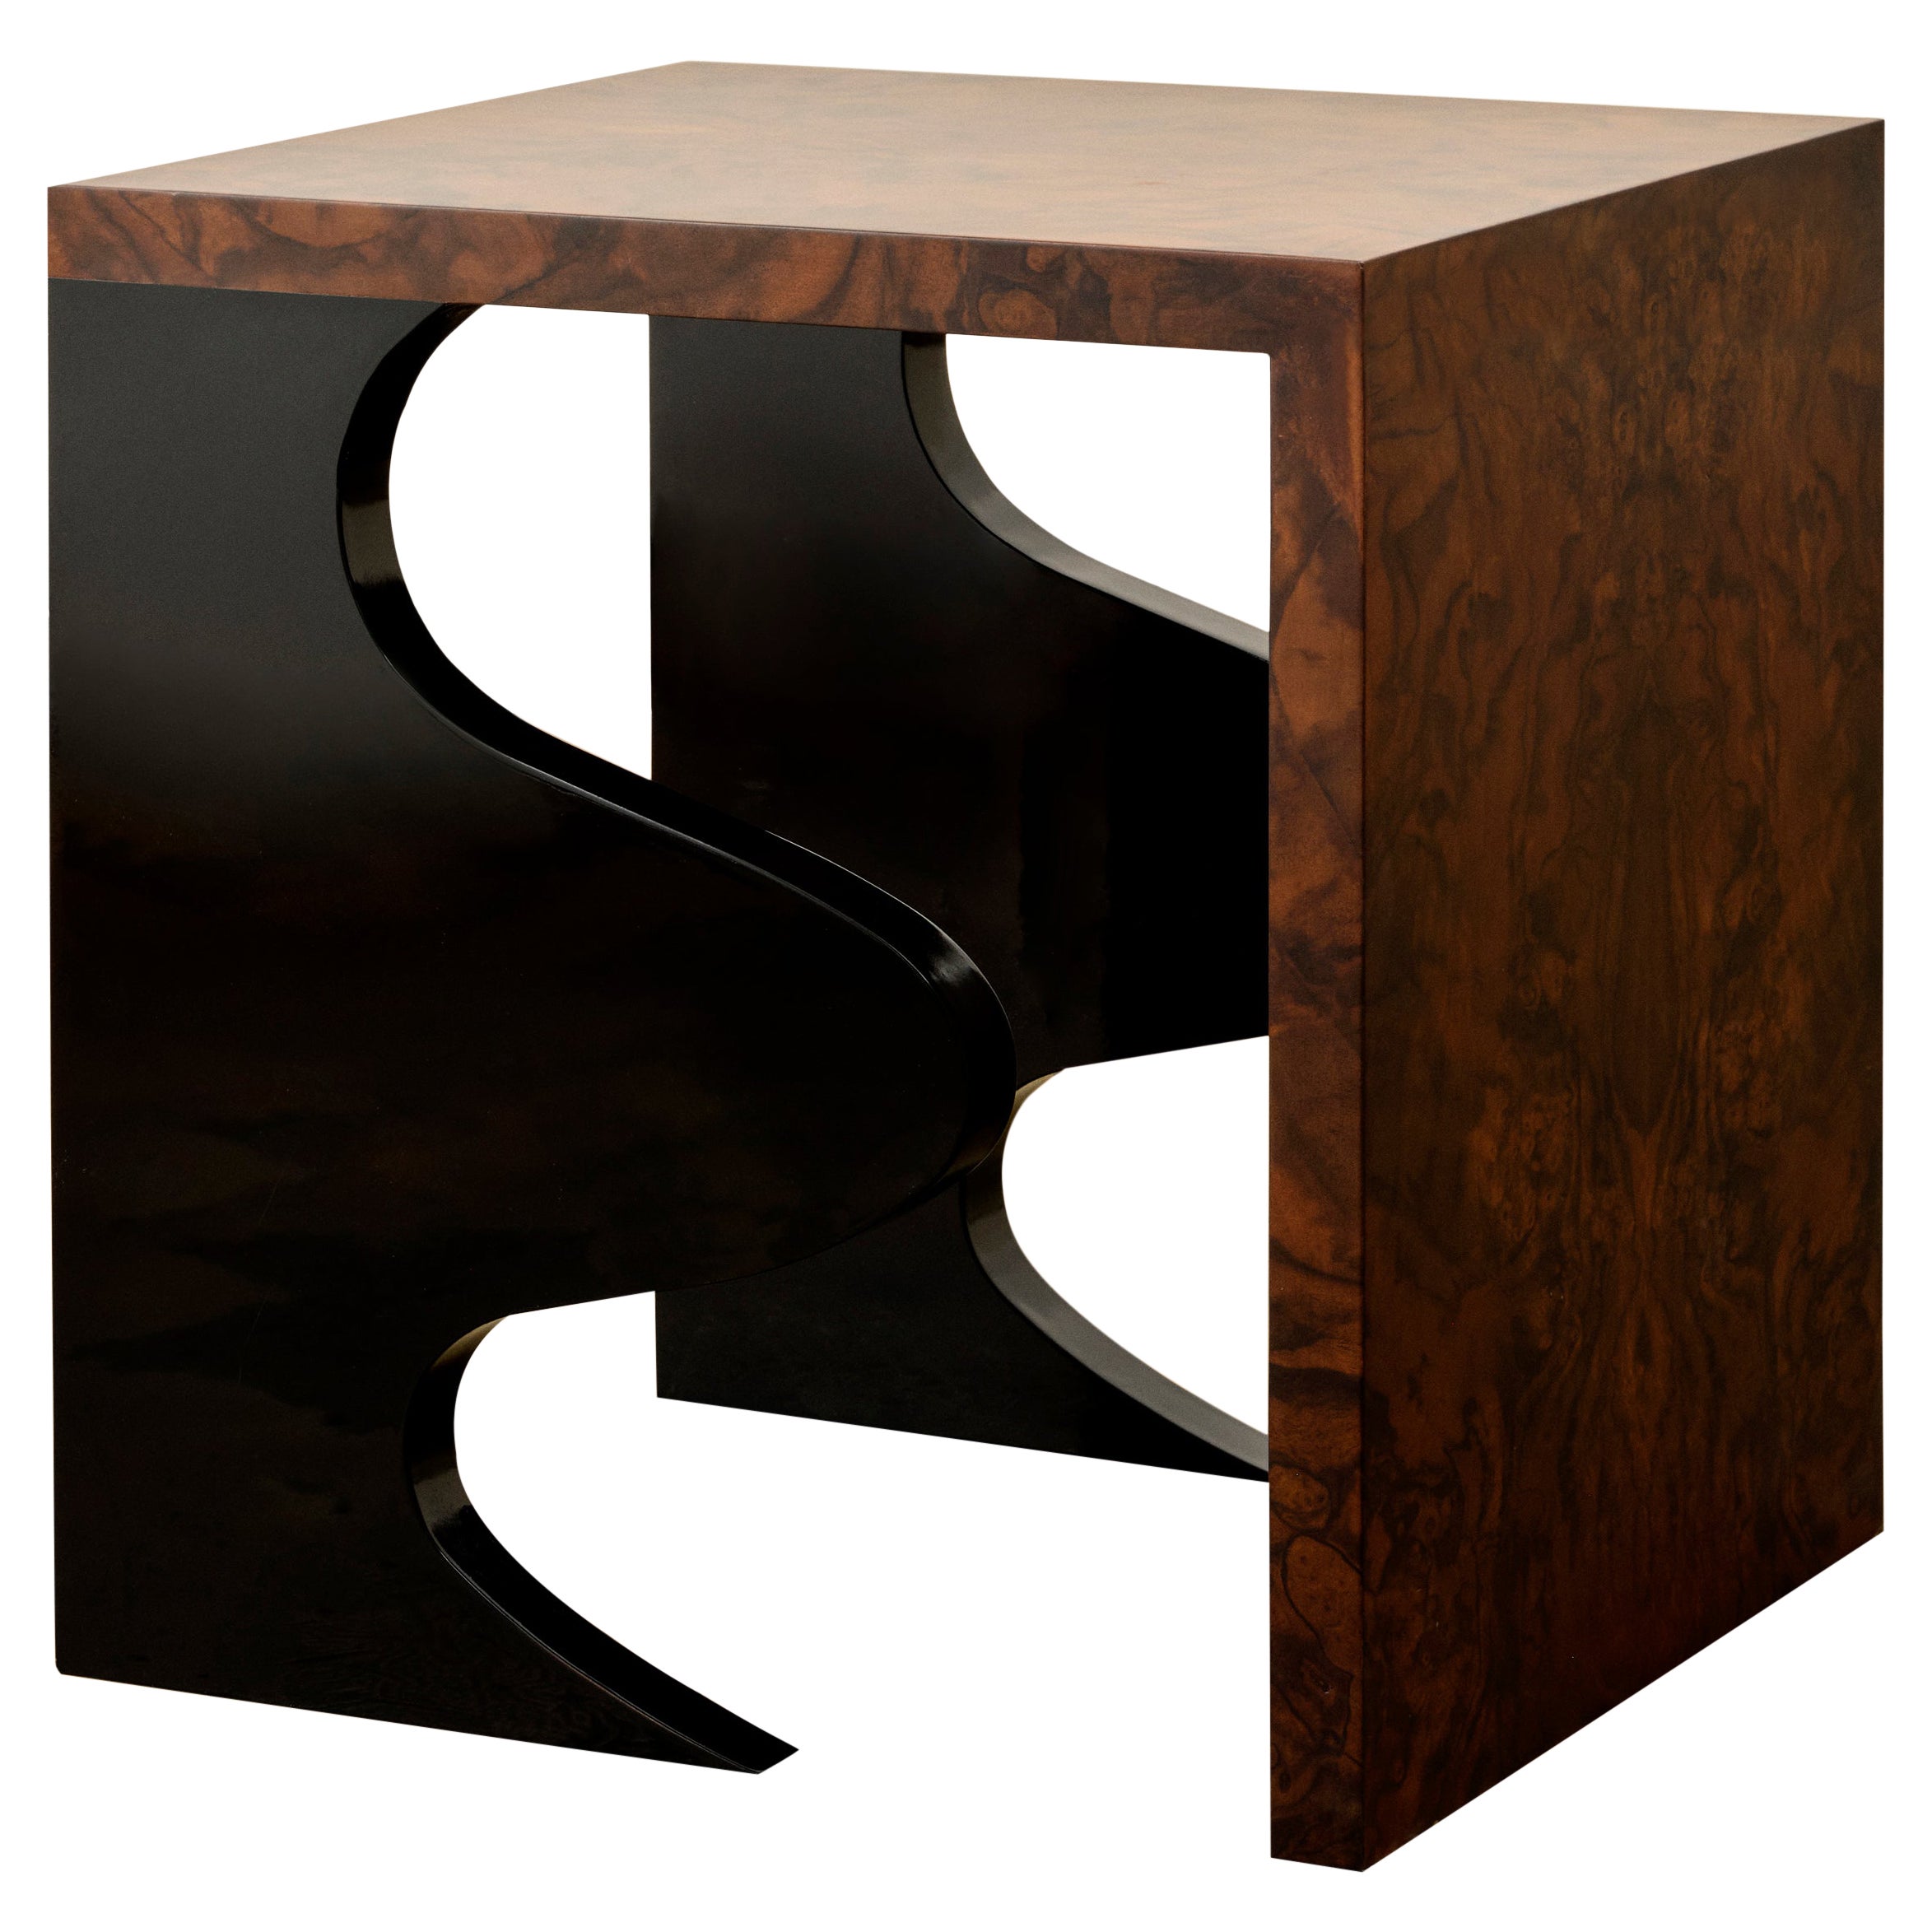 Animate Objects Harlequin Side Table, Walnut Burl Veneer, Gloss Lacquered Wood